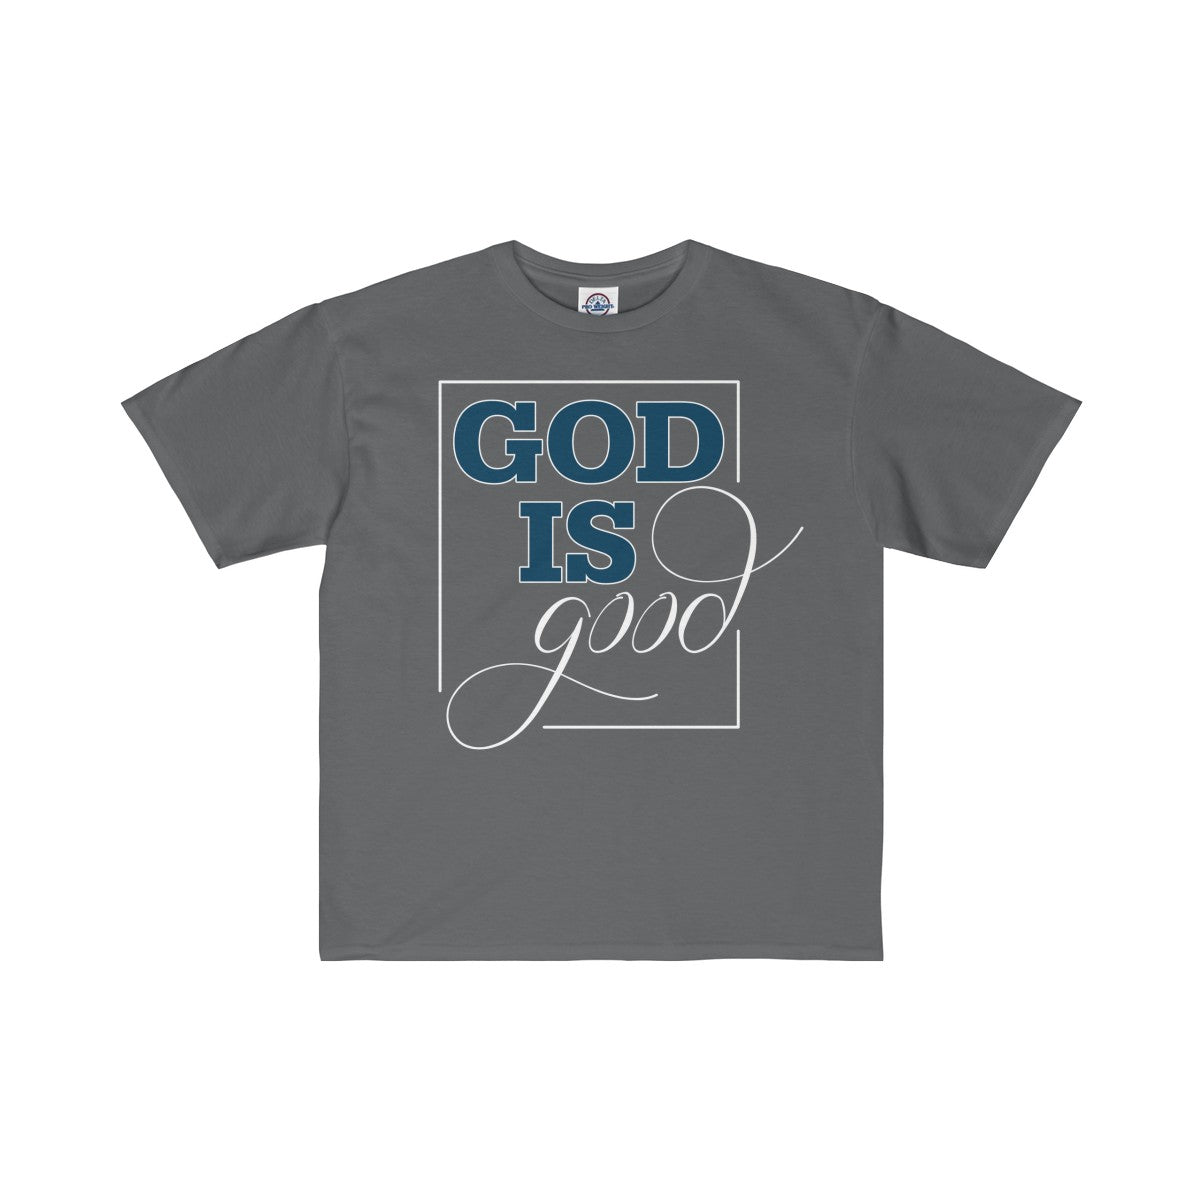 God is good Kids Retail Fit Tee-Kids clothes-PureDesignTees